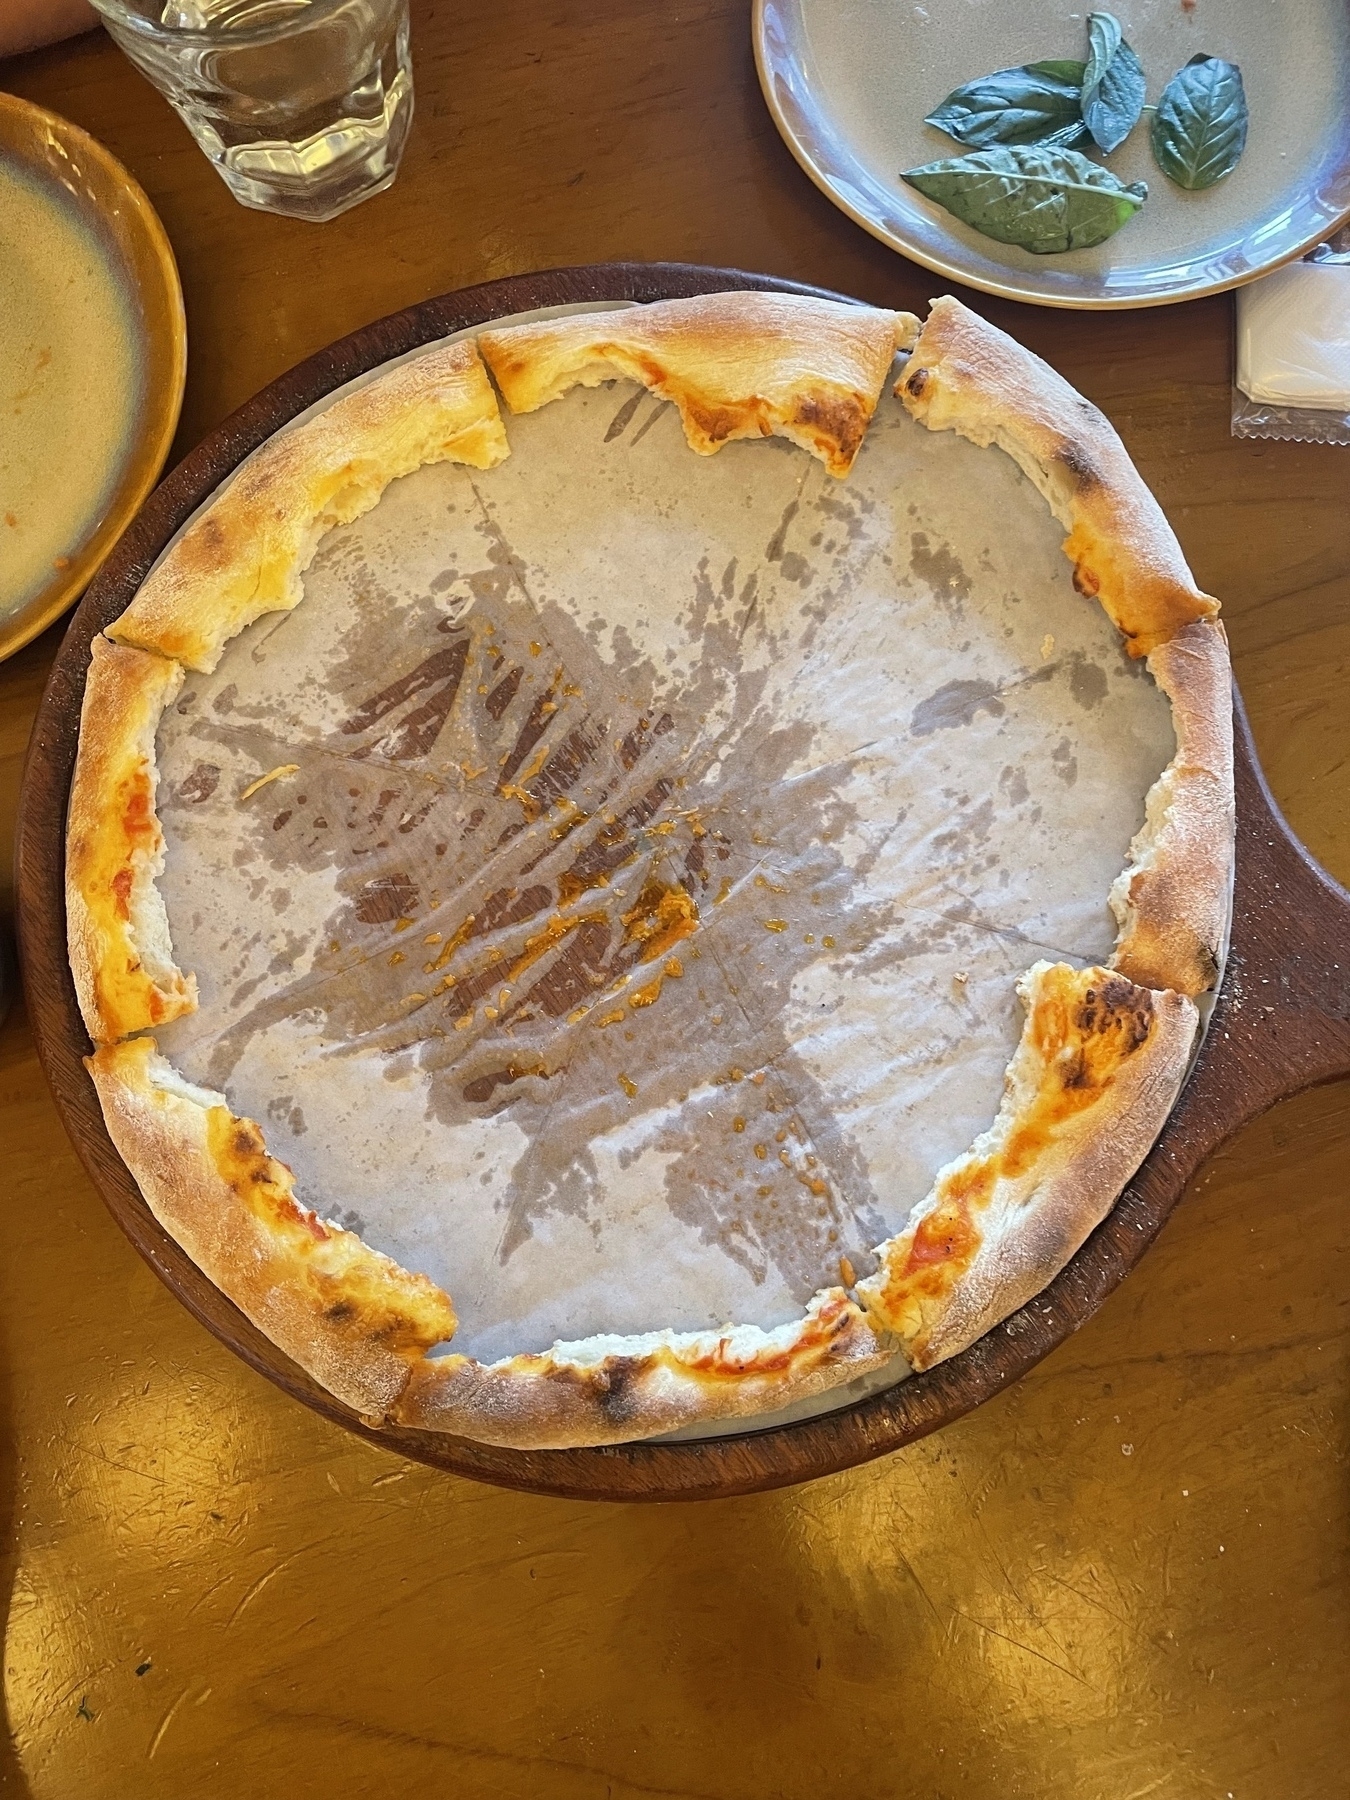 A pizza with the middle eaten out, leaving only the crust.